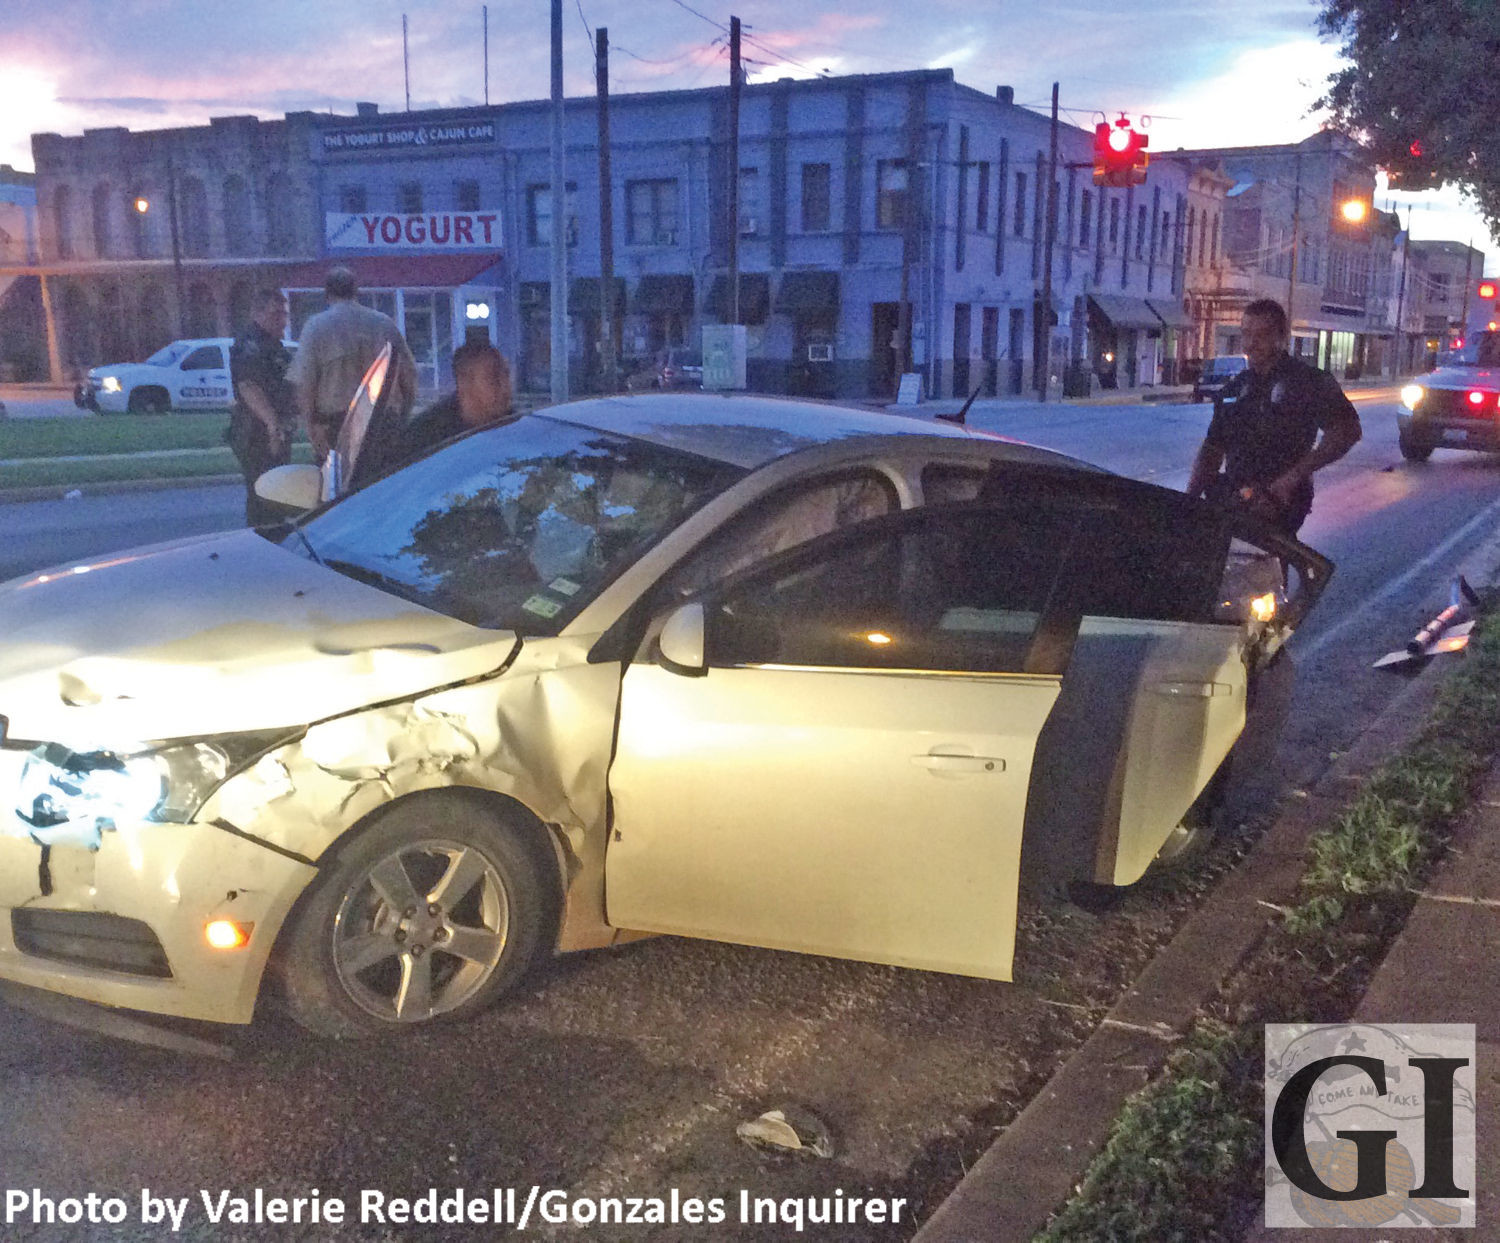 Officers said Augustine Martinez, the driver of this white Chevy, was at fault for failing to yield to the right of way of the ambulance. At the time, no citation had been written.